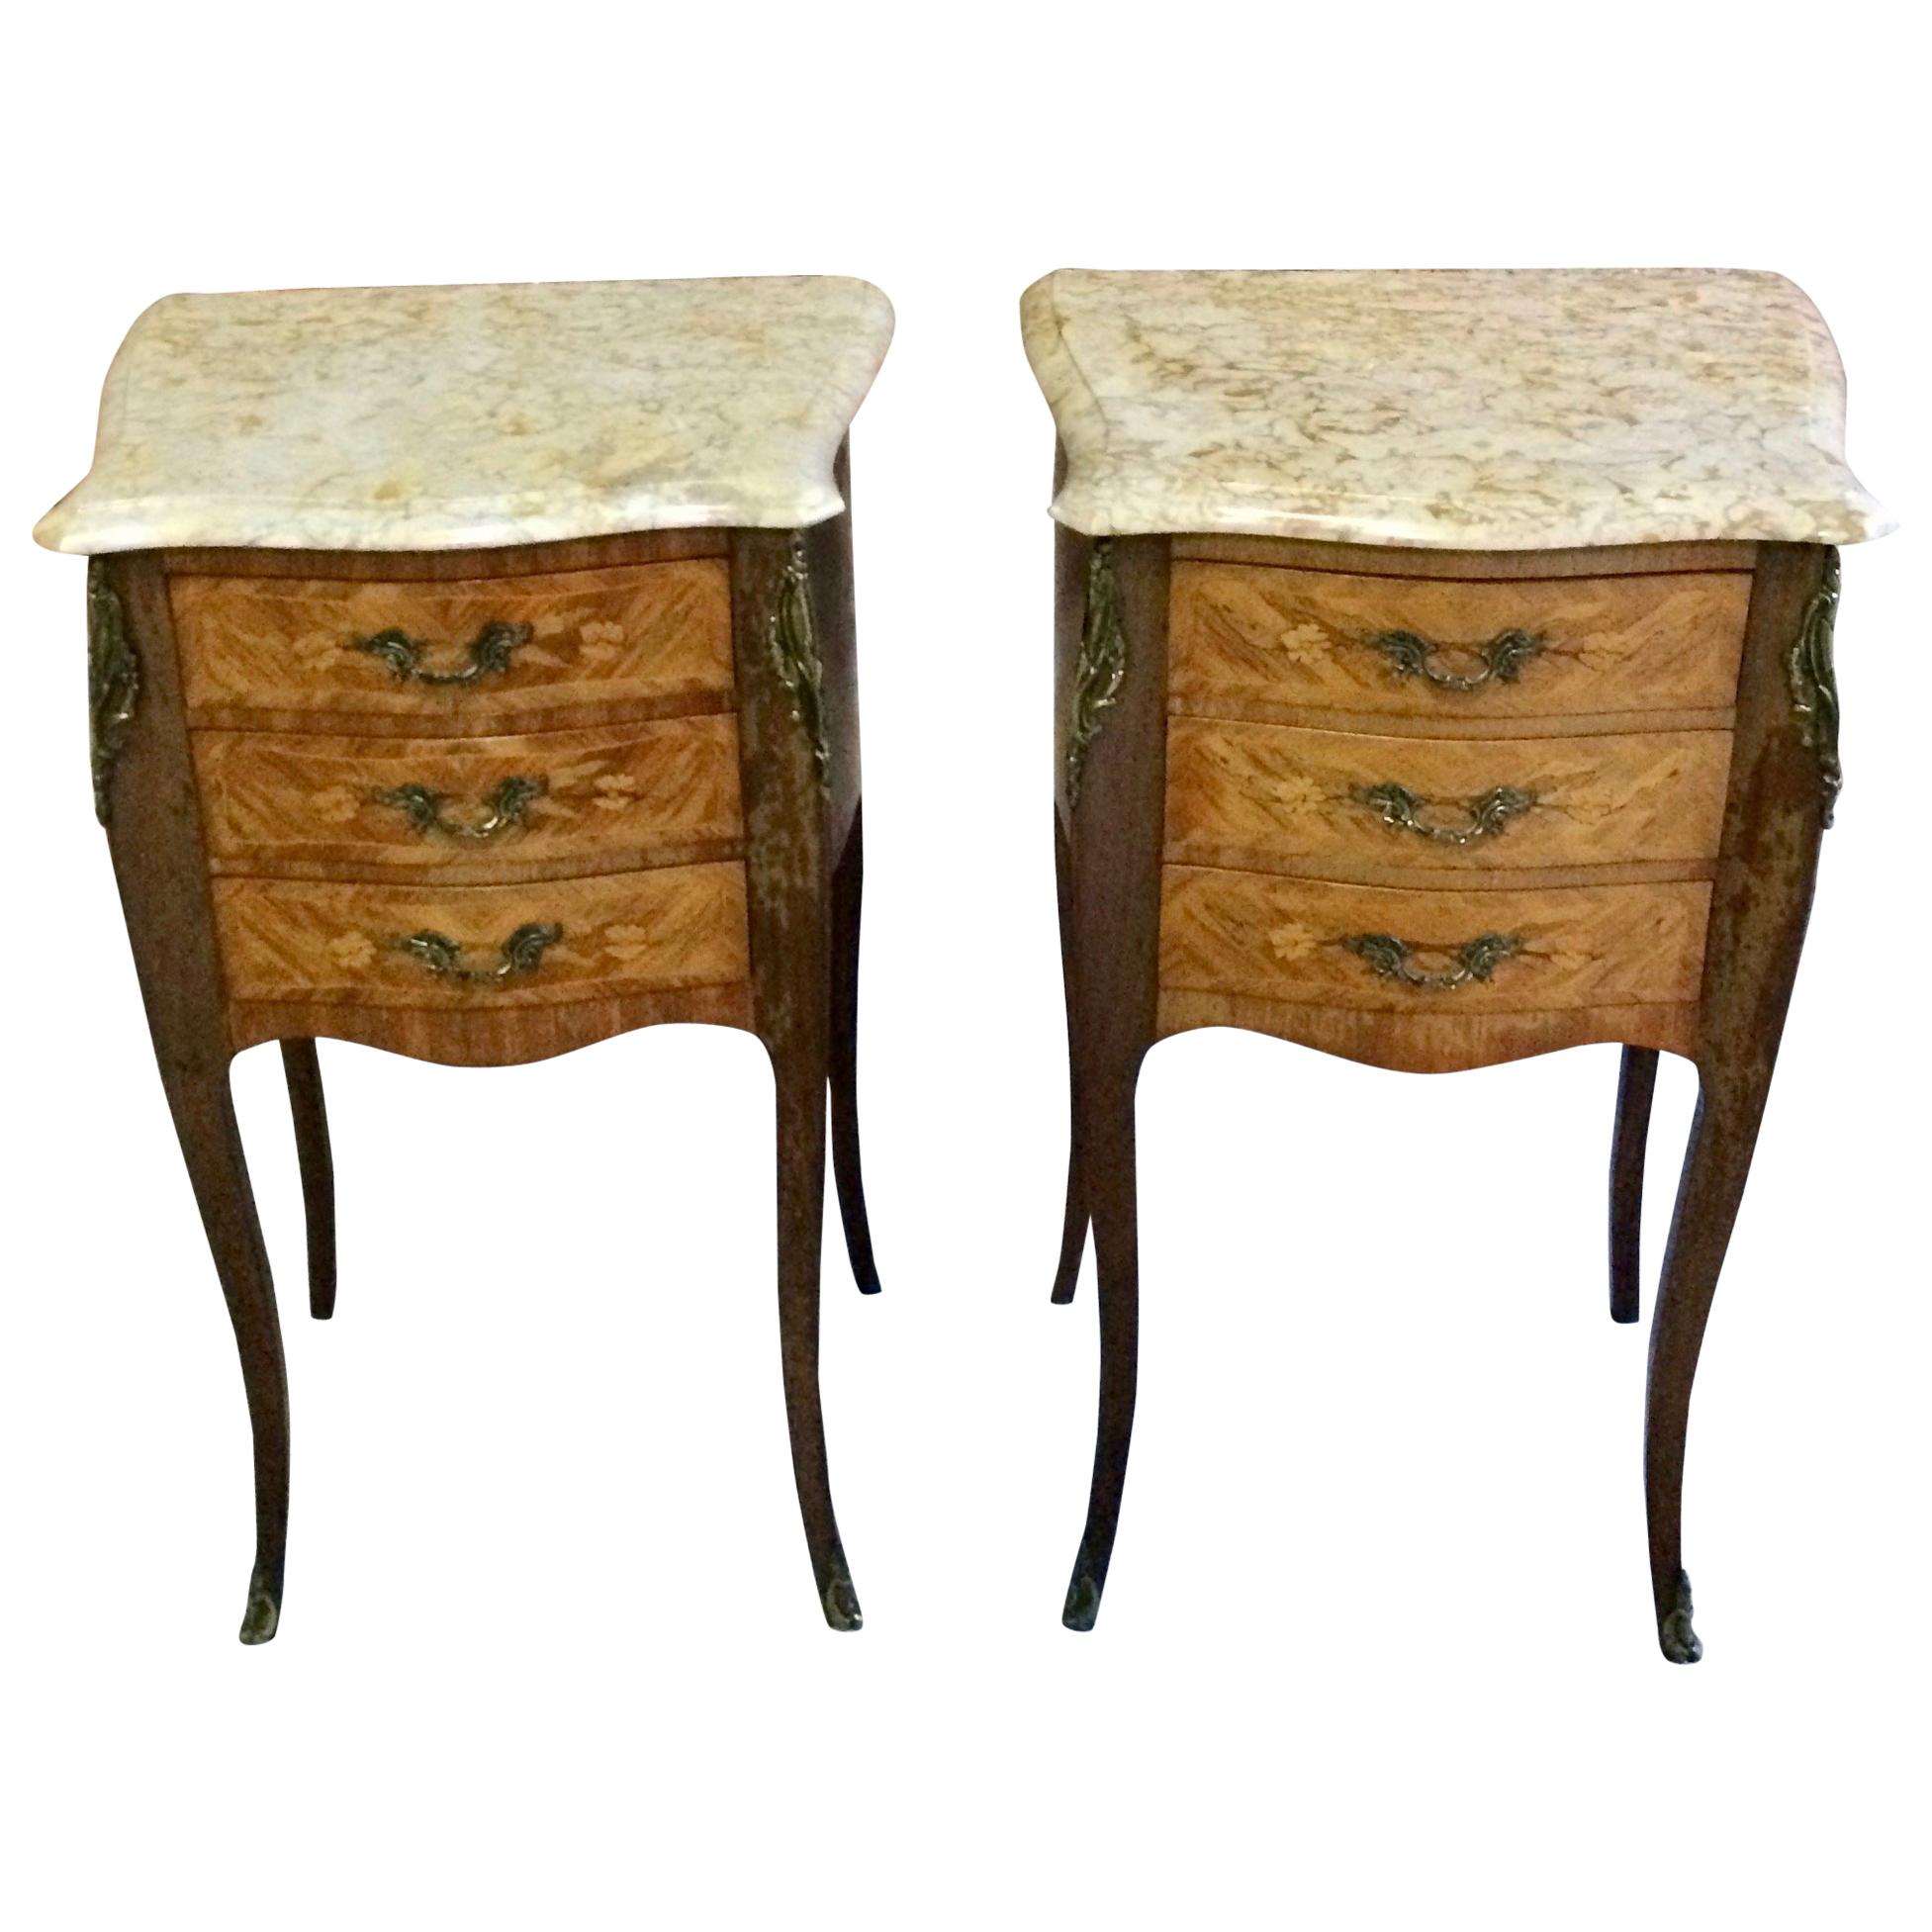 French Louis XV Marble Bombe Commode Bedside Cabinets Tables Set 2